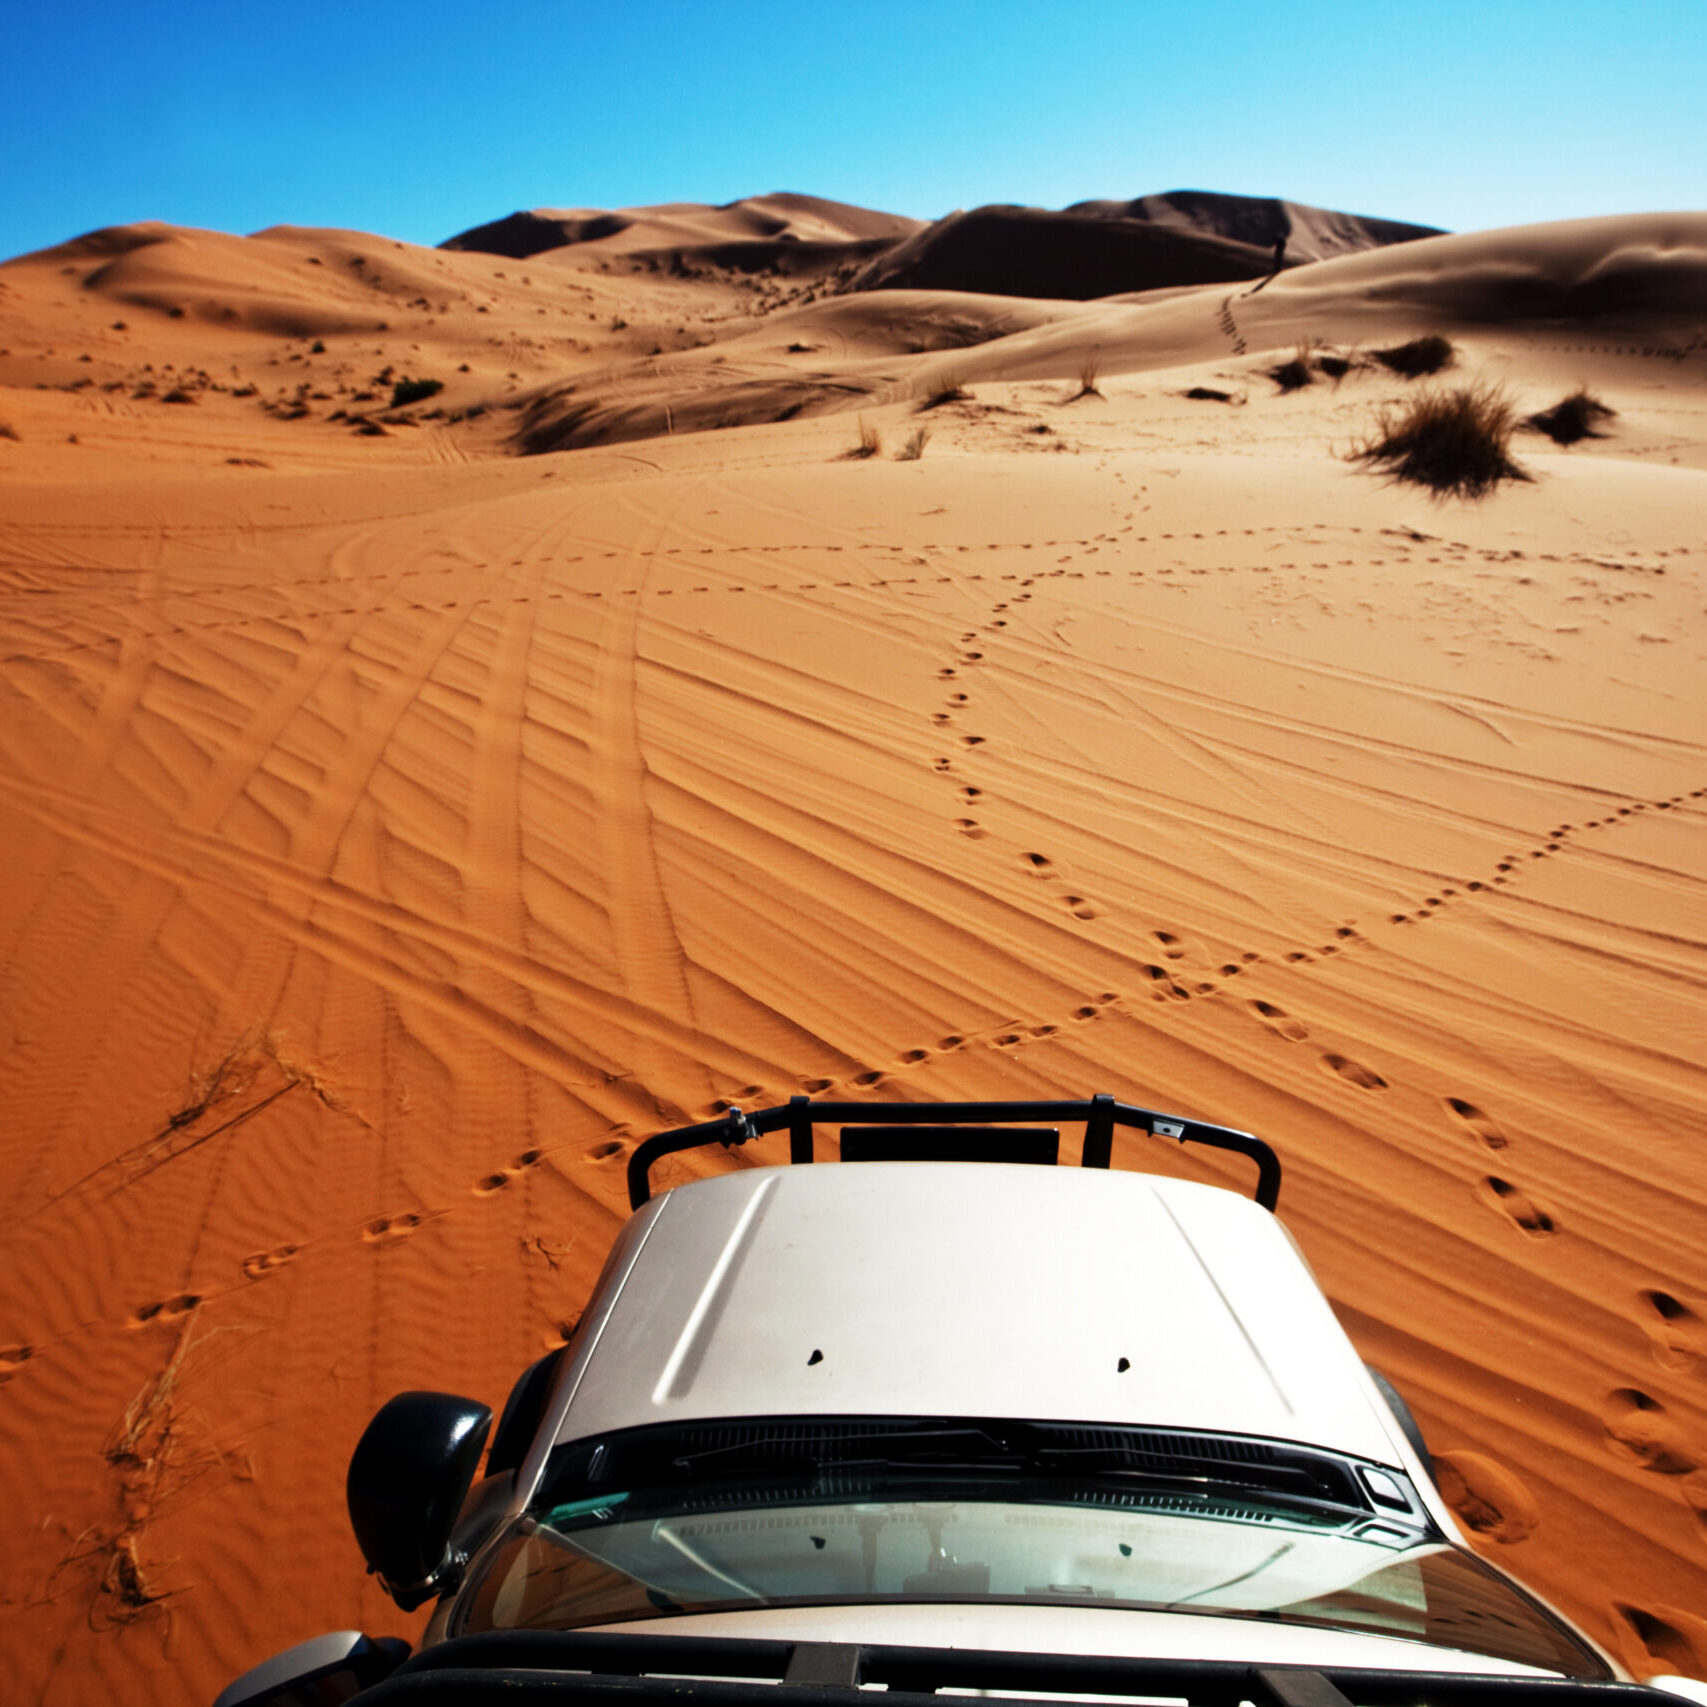 4x4 vehicle driving off road in Sahara desert, Morocco, Africa